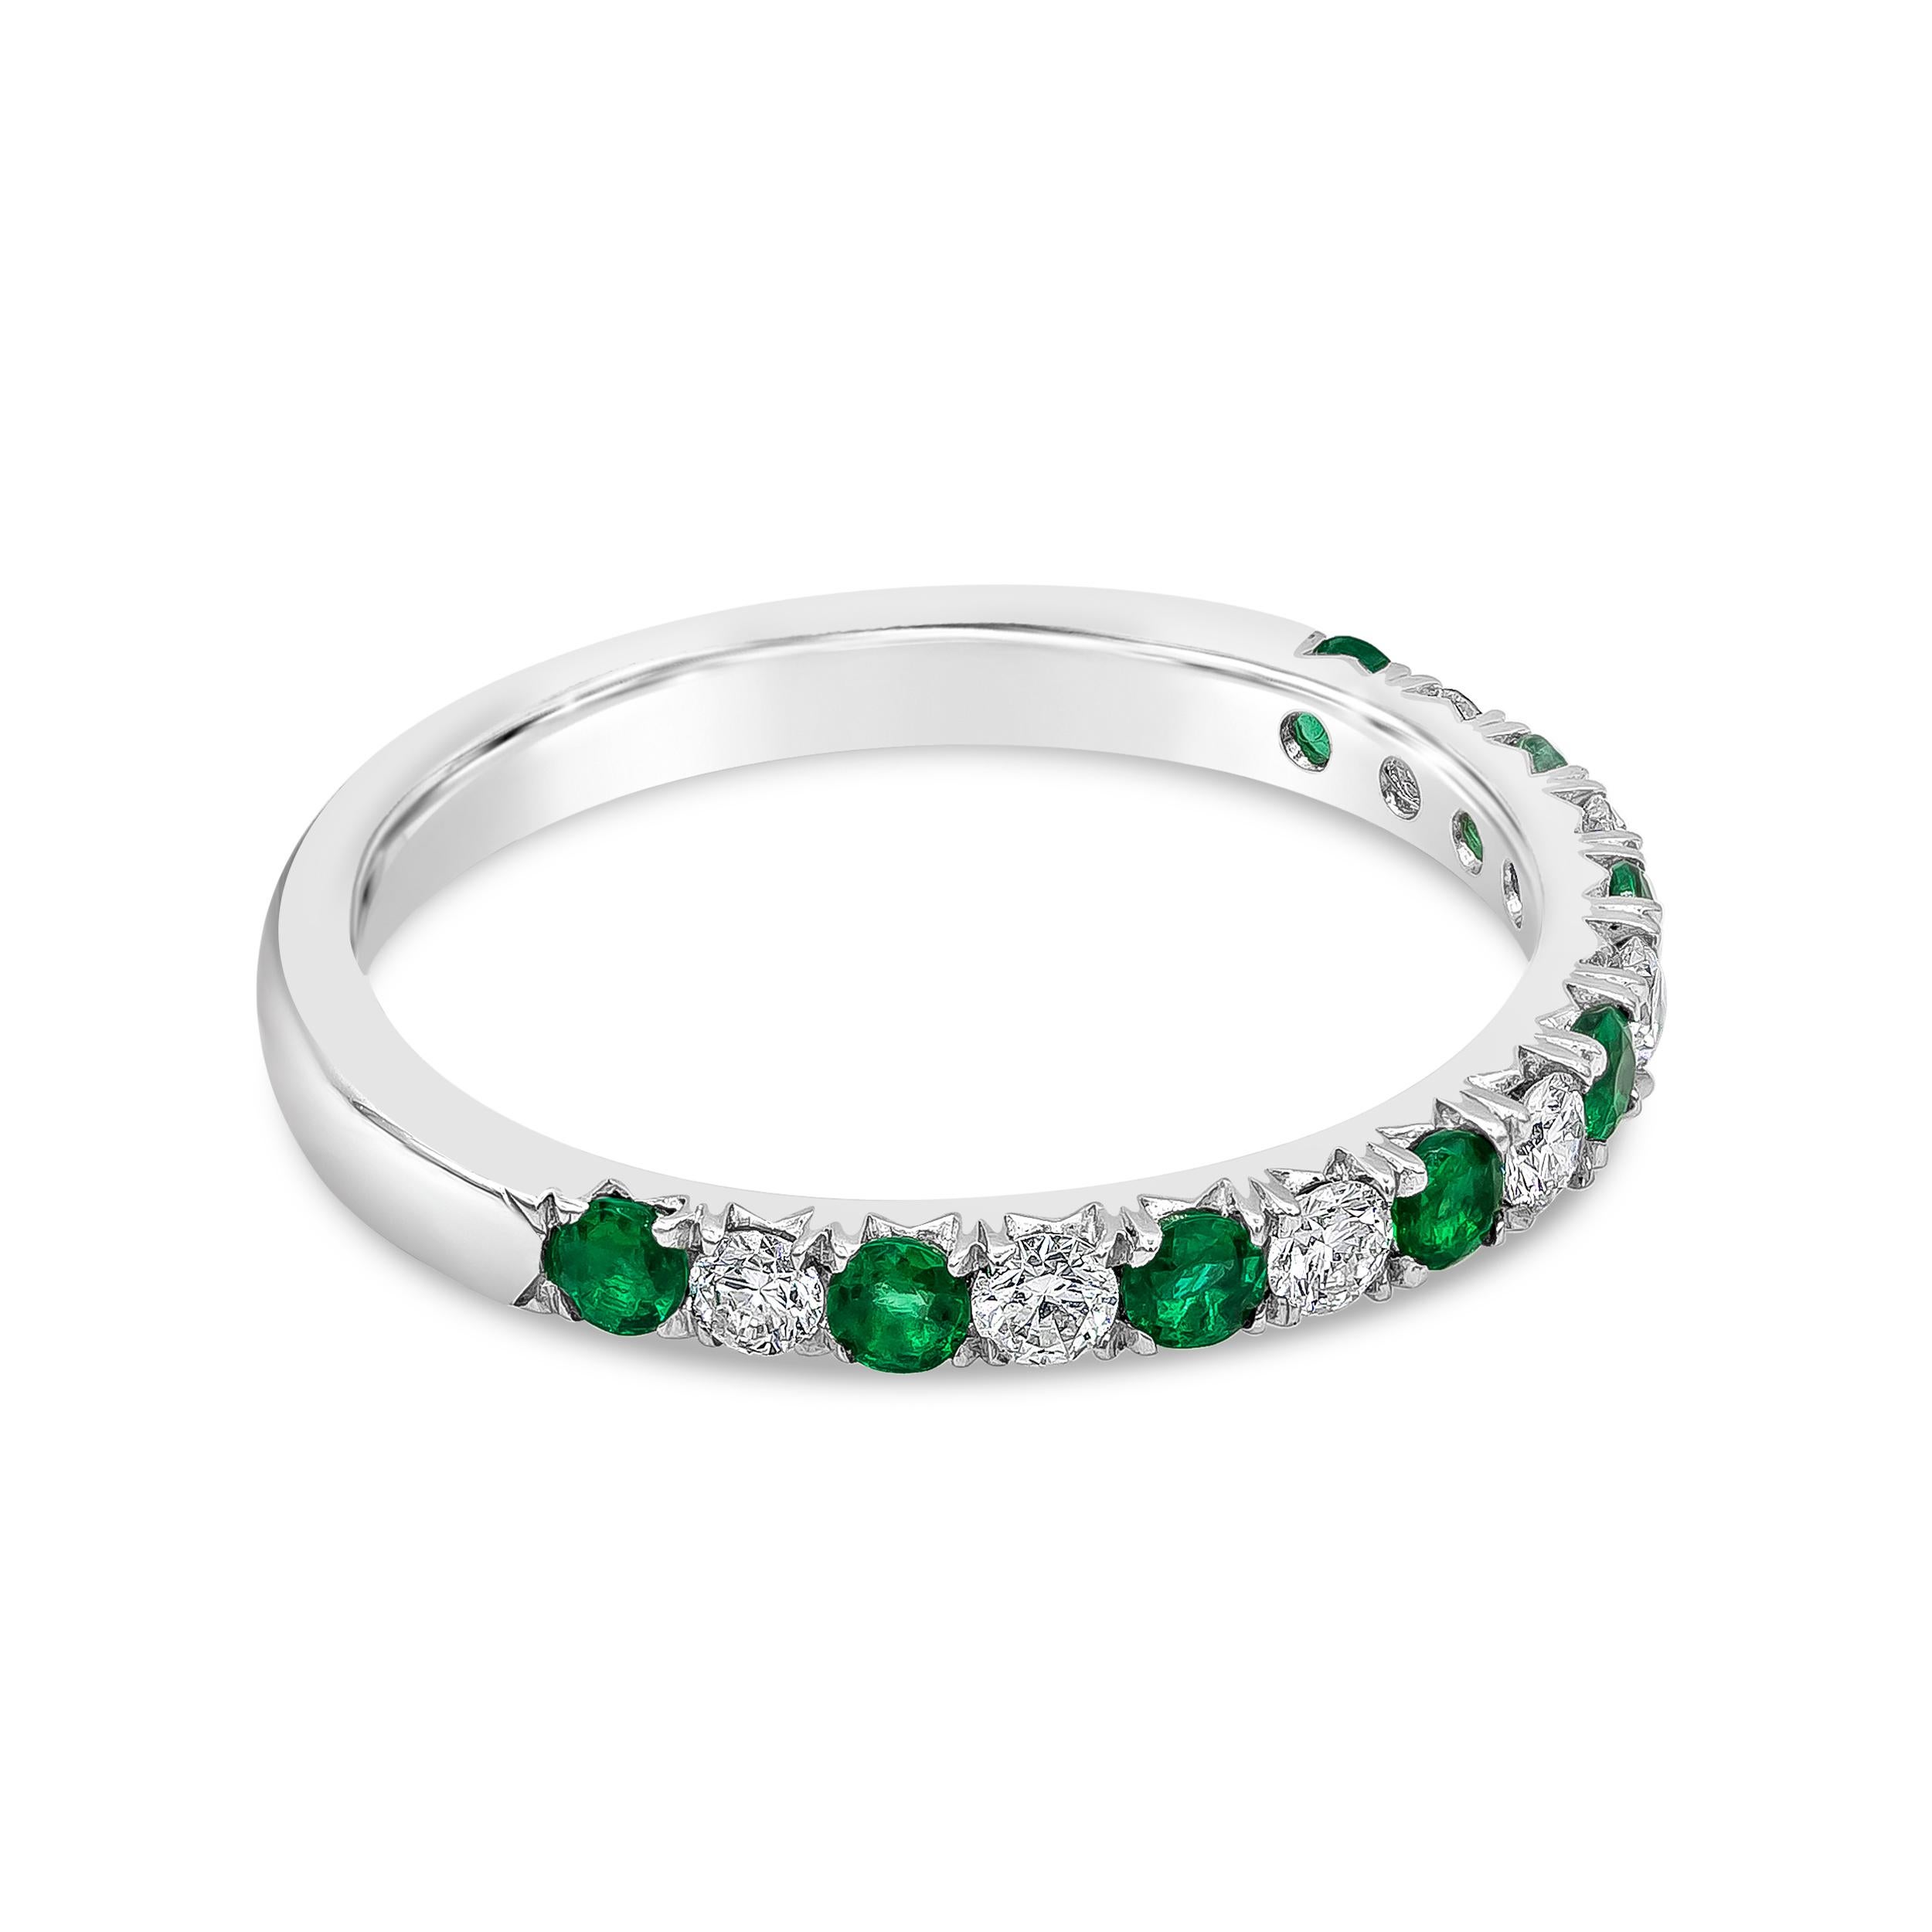 A fashionable and classic wedding band showcasing color-rich green emeralds weighing 0.29 carats total that alternate with brilliant round diamonds weighing 0.23 carats total. Stones secured with a french pave setting made in 18K White Gold. Size